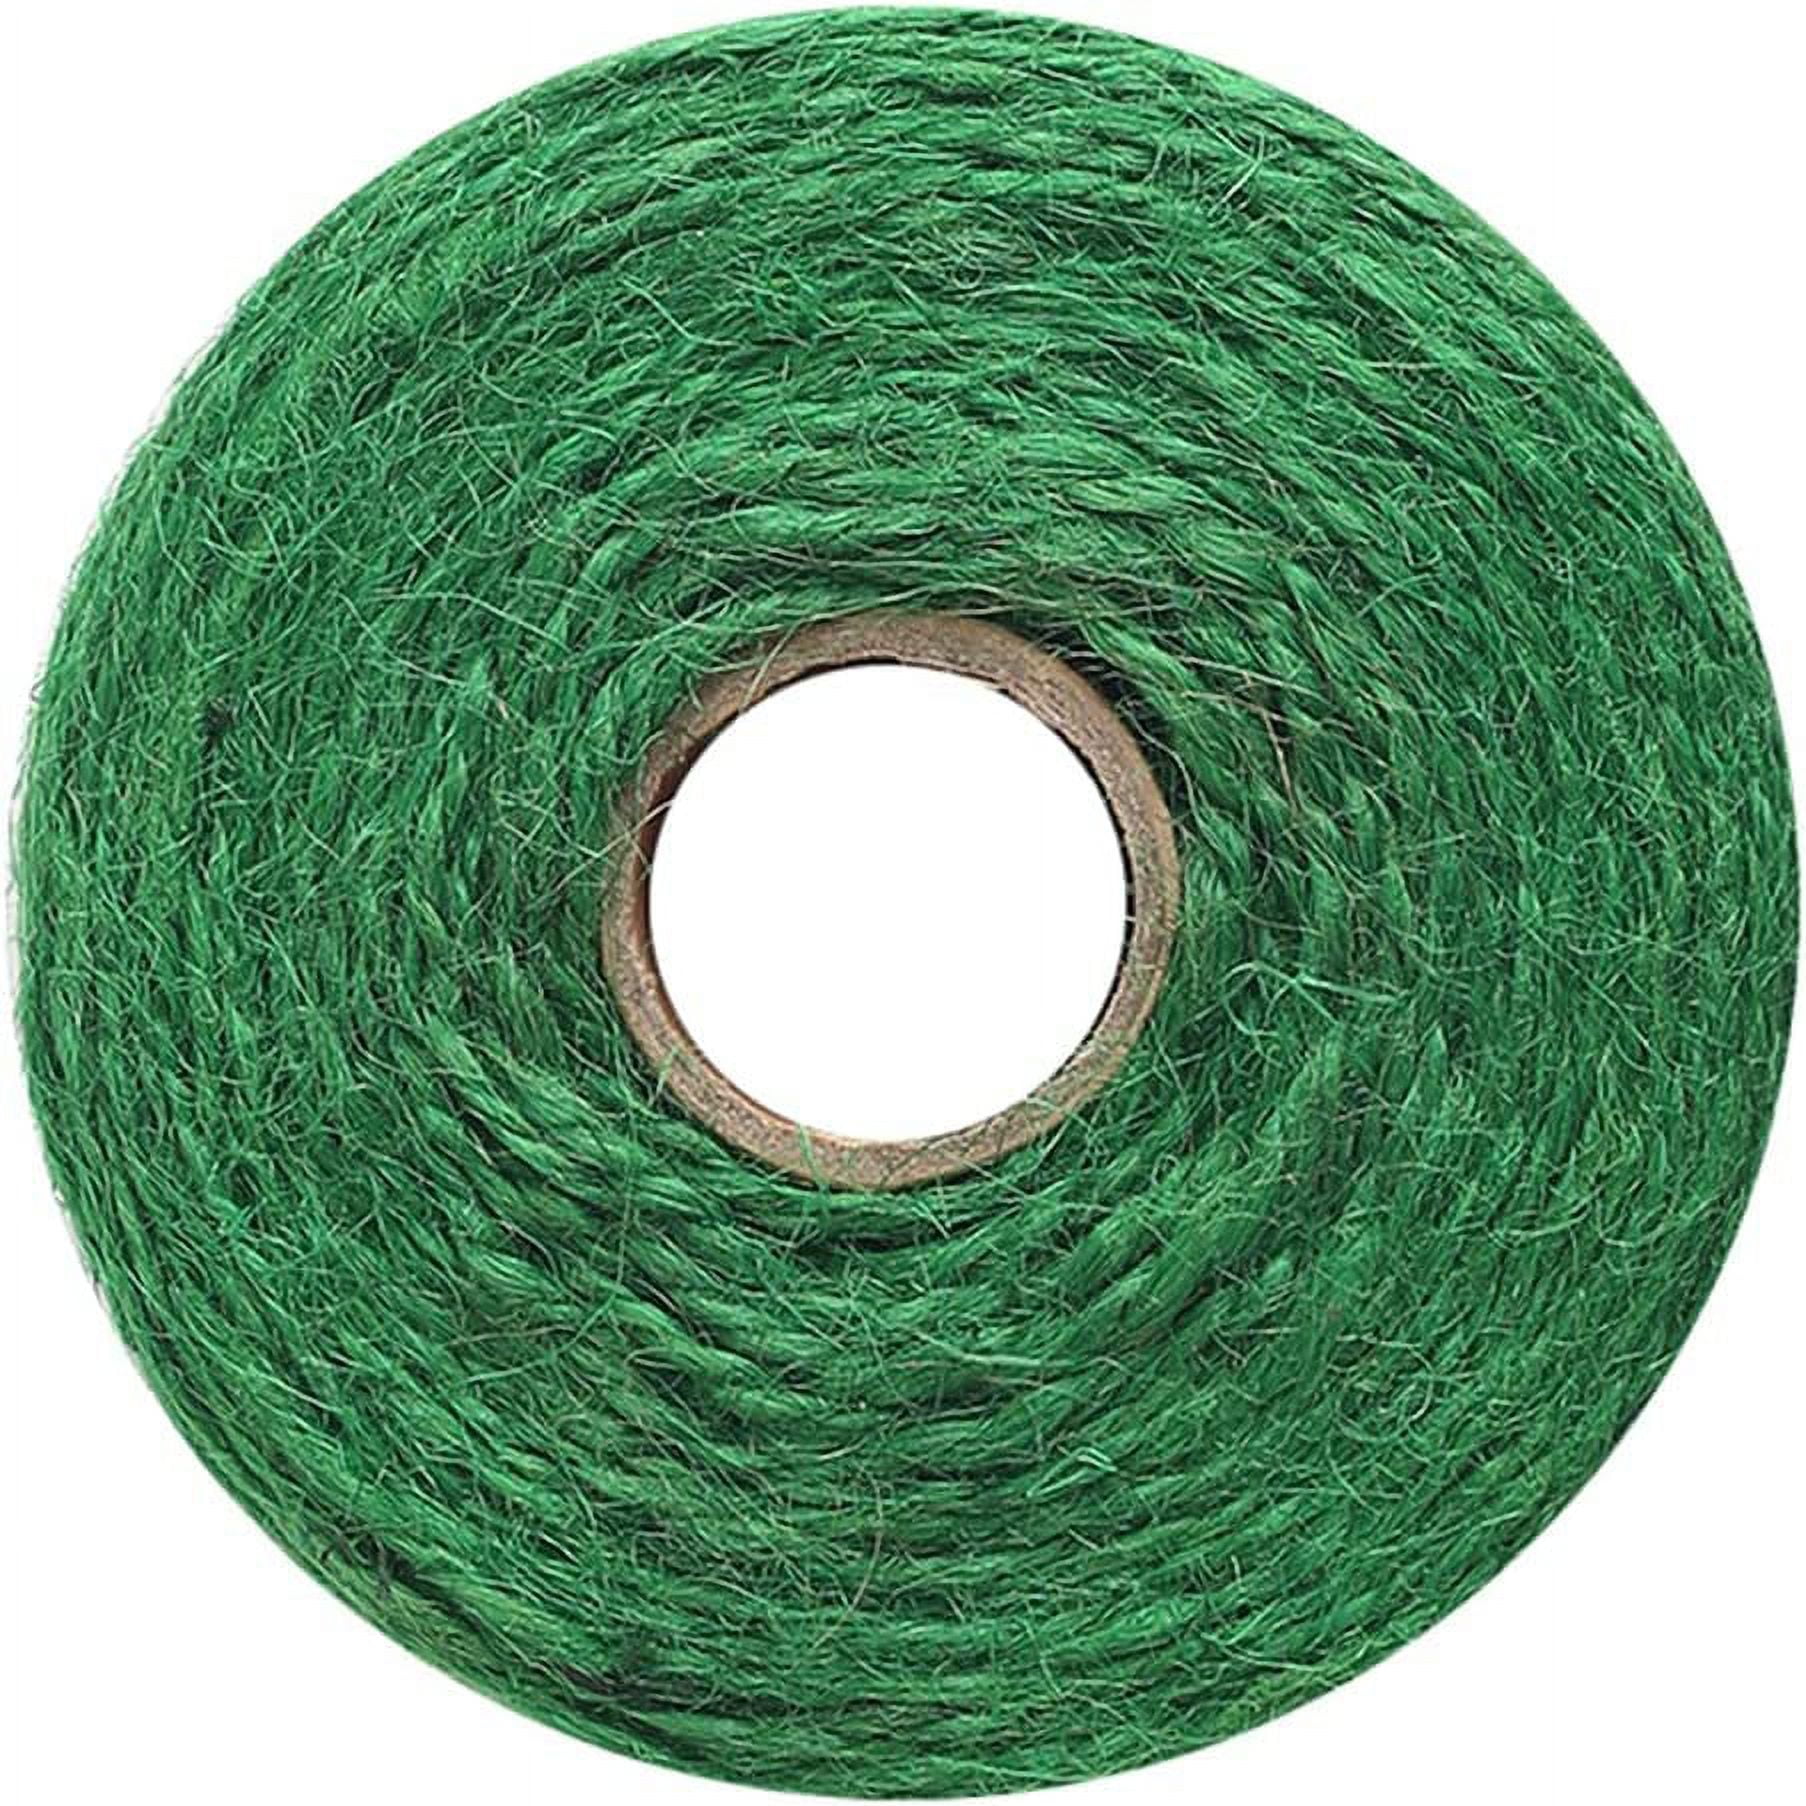  656 Feet Green Garden Twine, Natural Jute Twine Green String  Heavy Duty Jute Rope String Christmas Twine for Craft Gardening Floristry  Bundling Gift Wrapping (328Feet/Roll) : Tools & Home Improvement